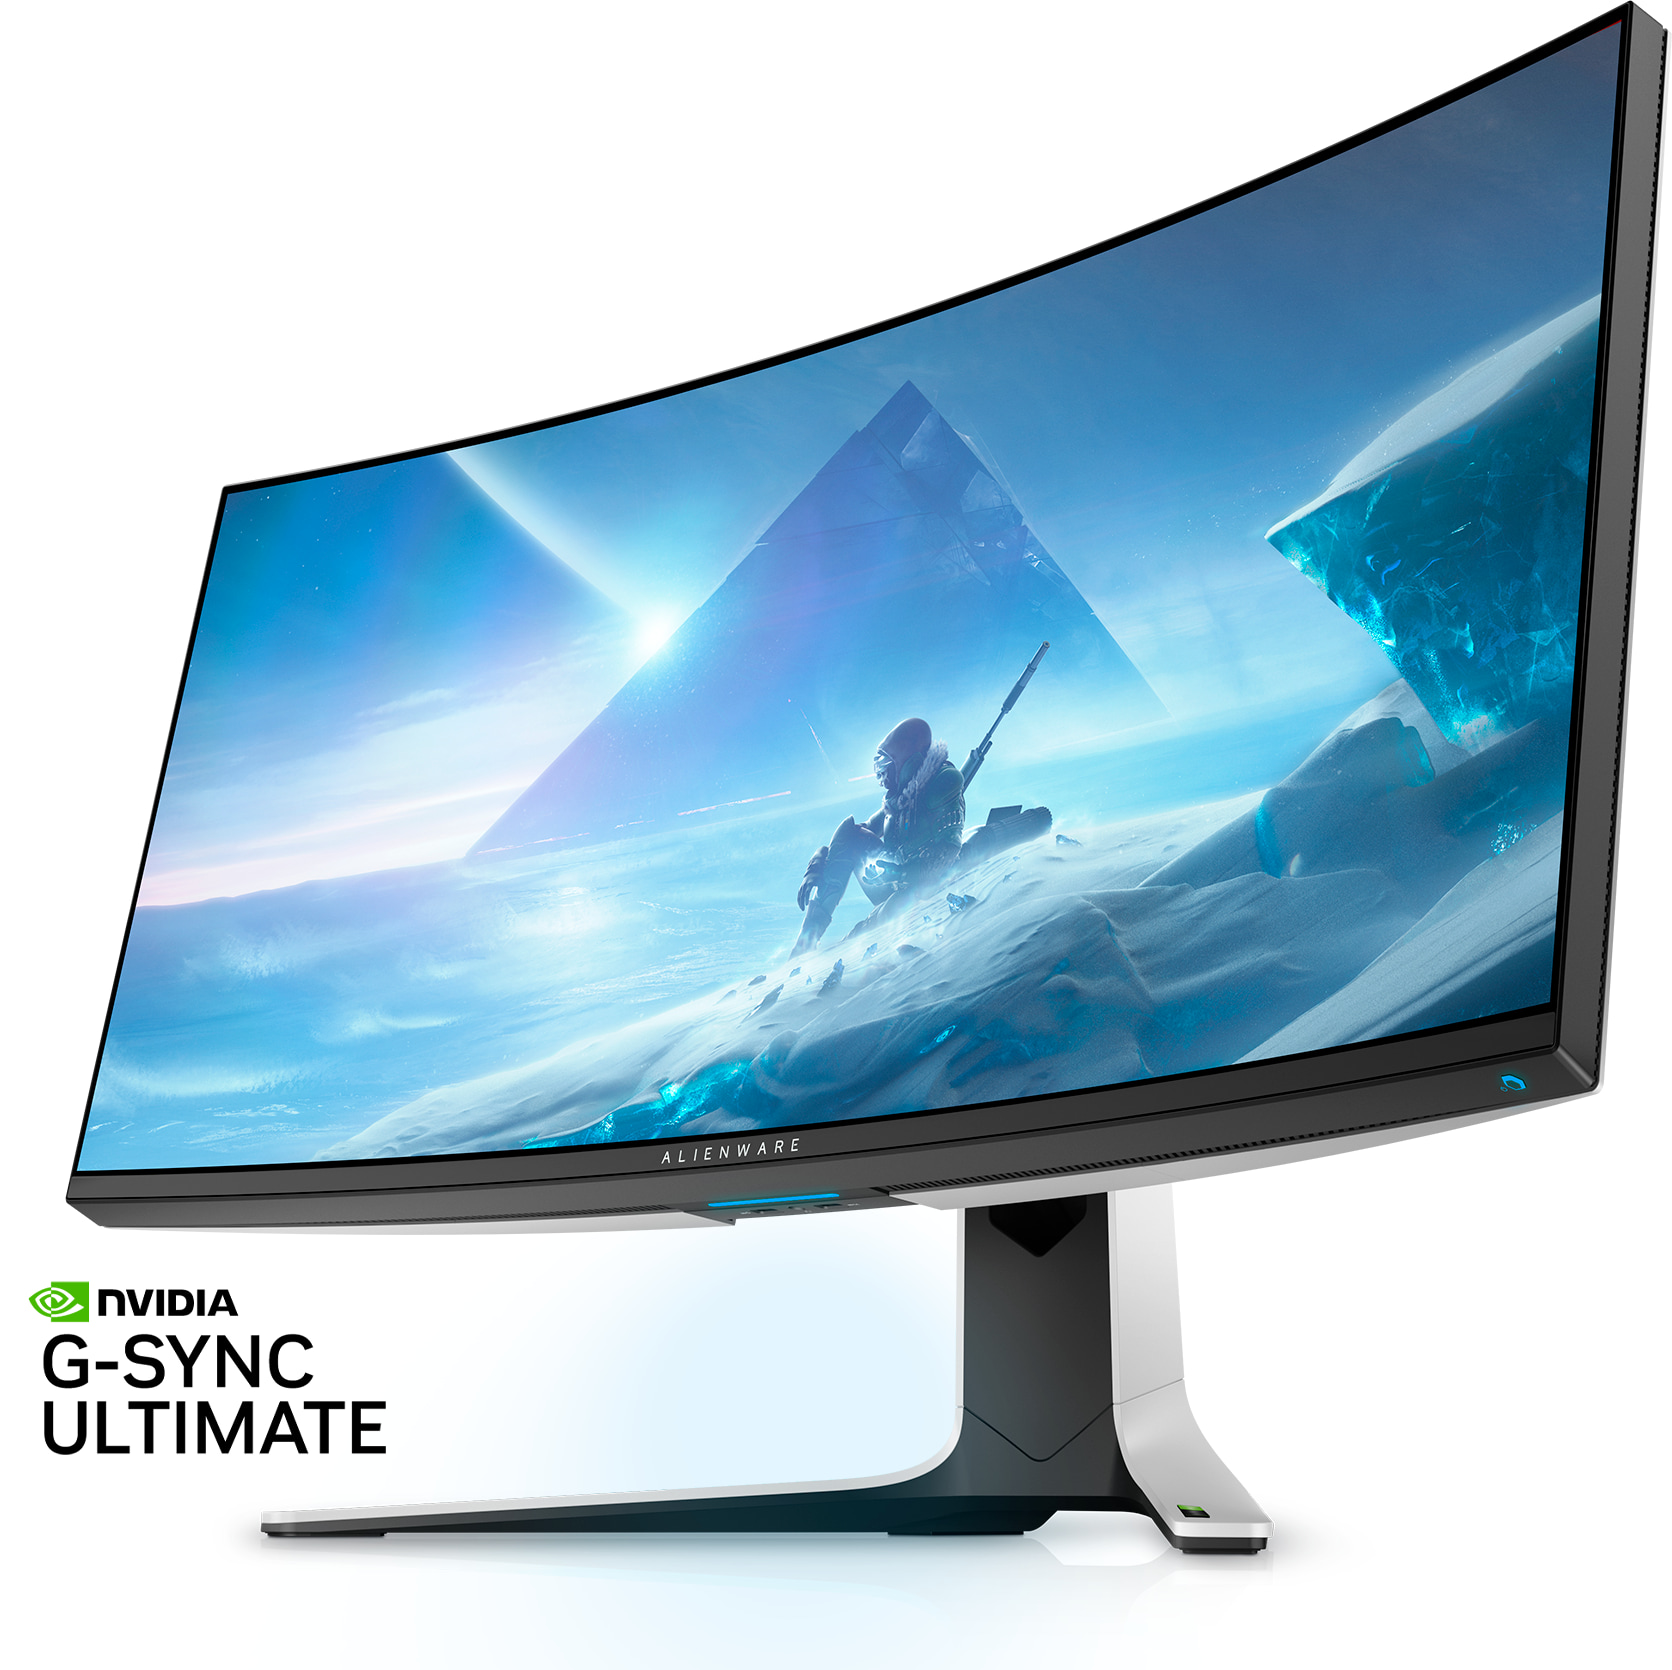 Alienware 38 Curved Gaming Monitor - AW3821DW